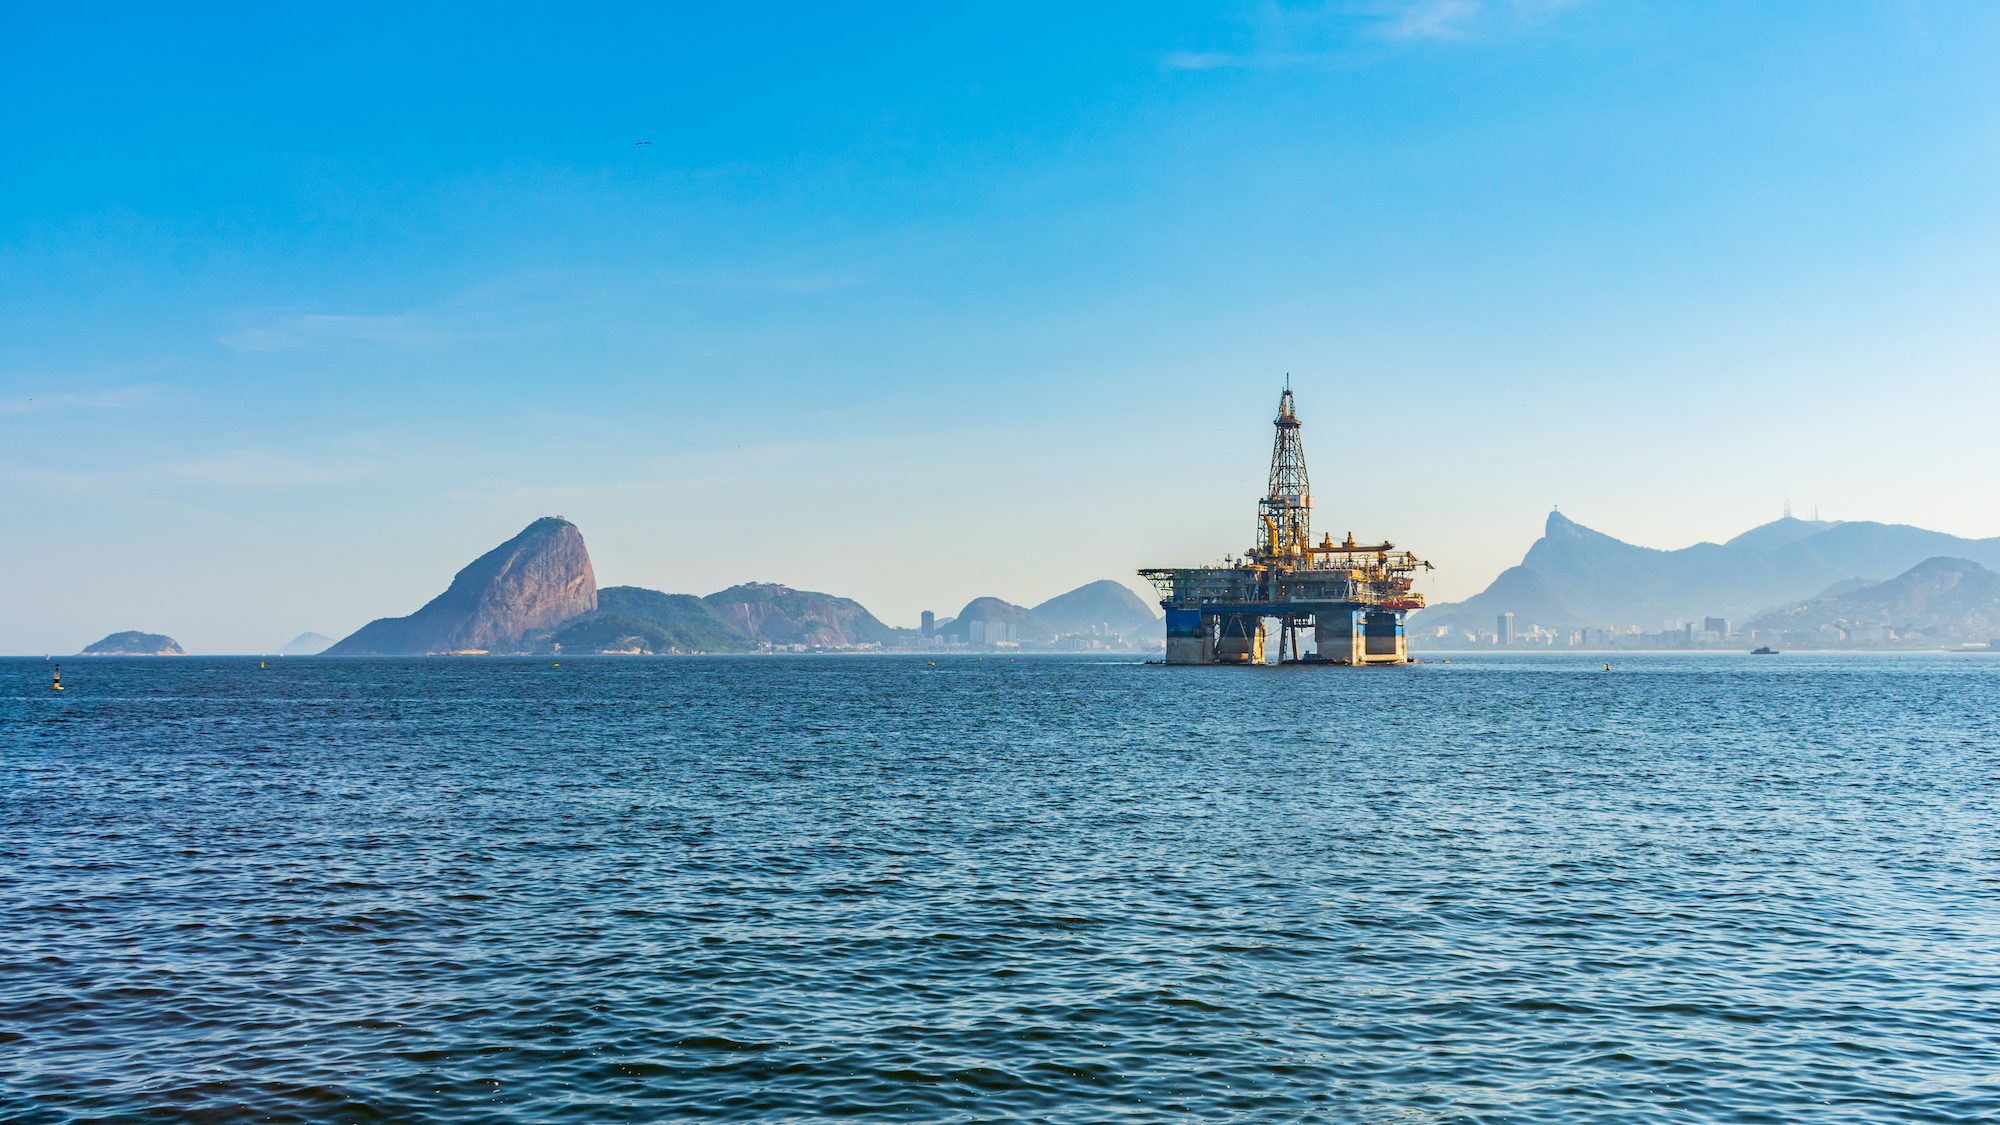 Big Oil Gets a Second Chance for Giant Offshore Fields in Brazil